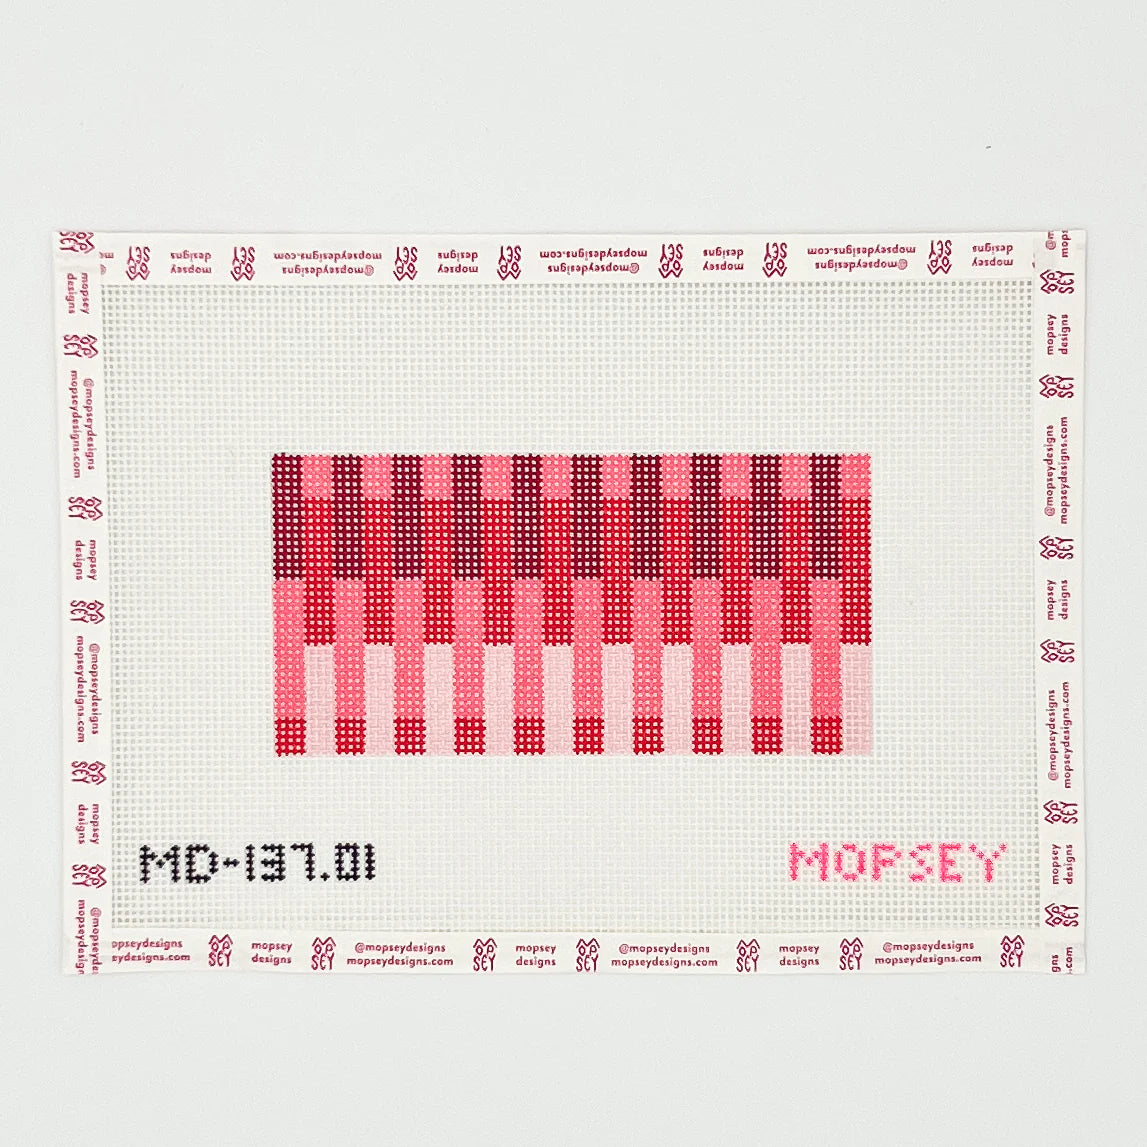 Mopsey Designs MD-137.01 Vertical Gradient Insert - Red and Pinks